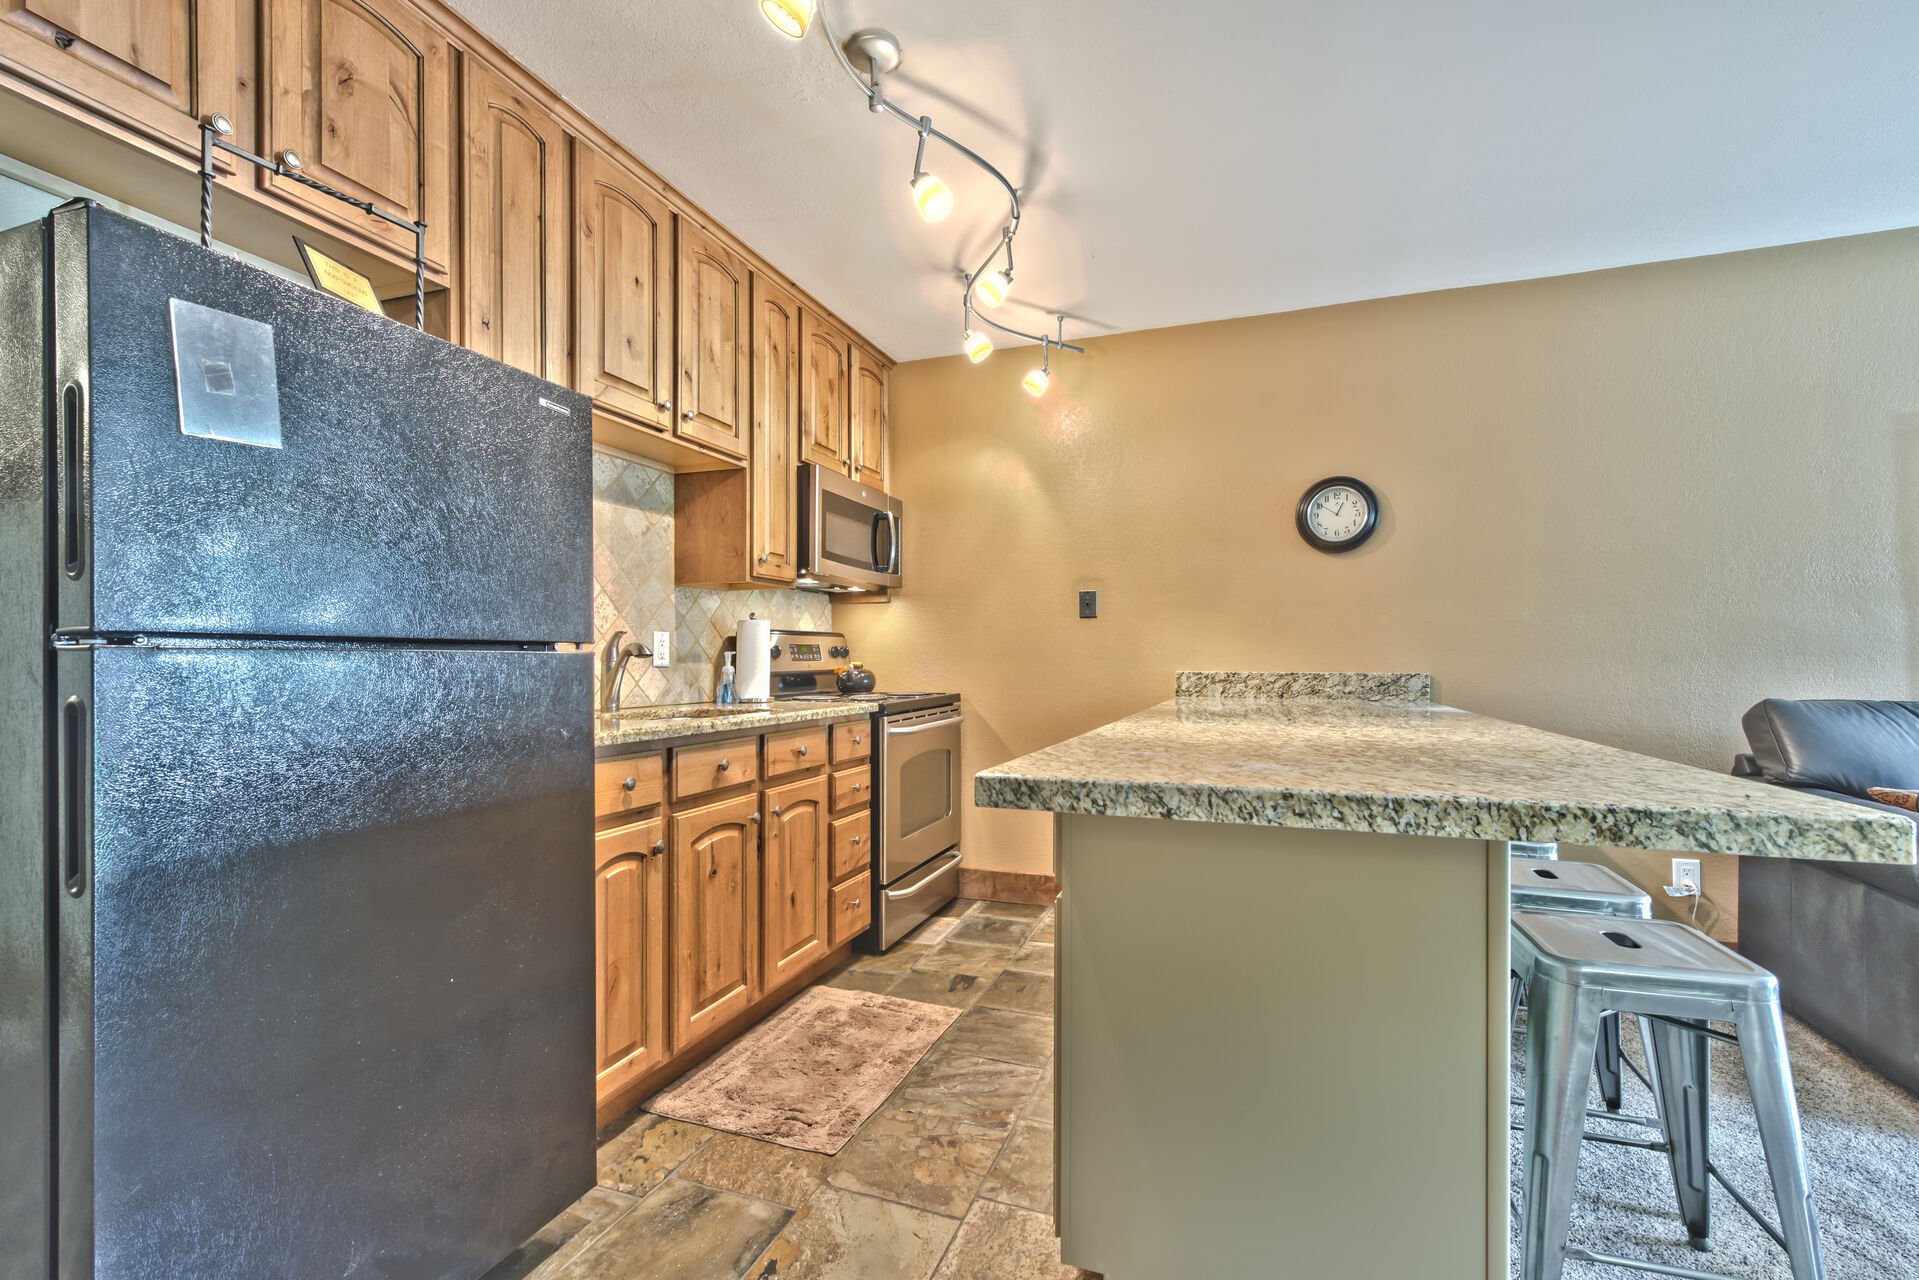 Equipped Kitchen with Granite Countertops, Stainless Steel Appliances and Bar Seating for 4